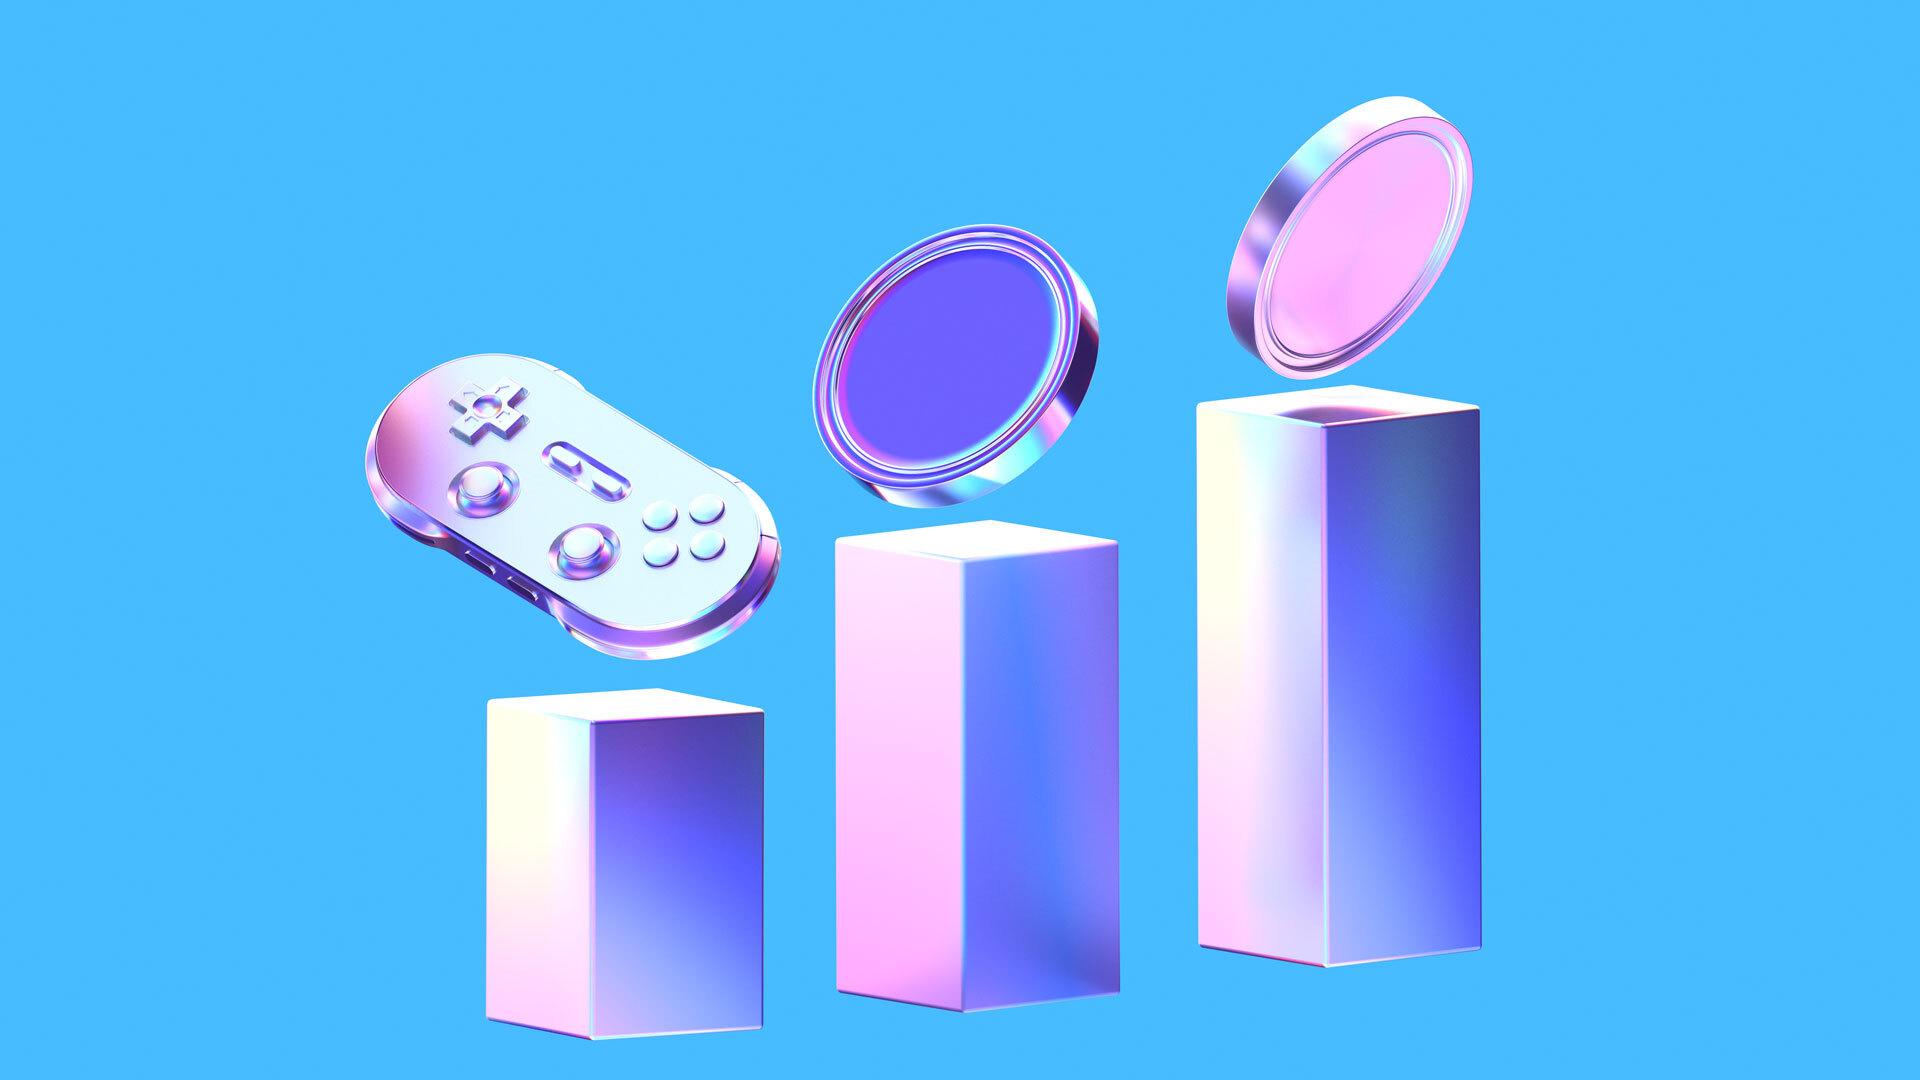 3D illustration of a video game controller and coins representing earning money from games